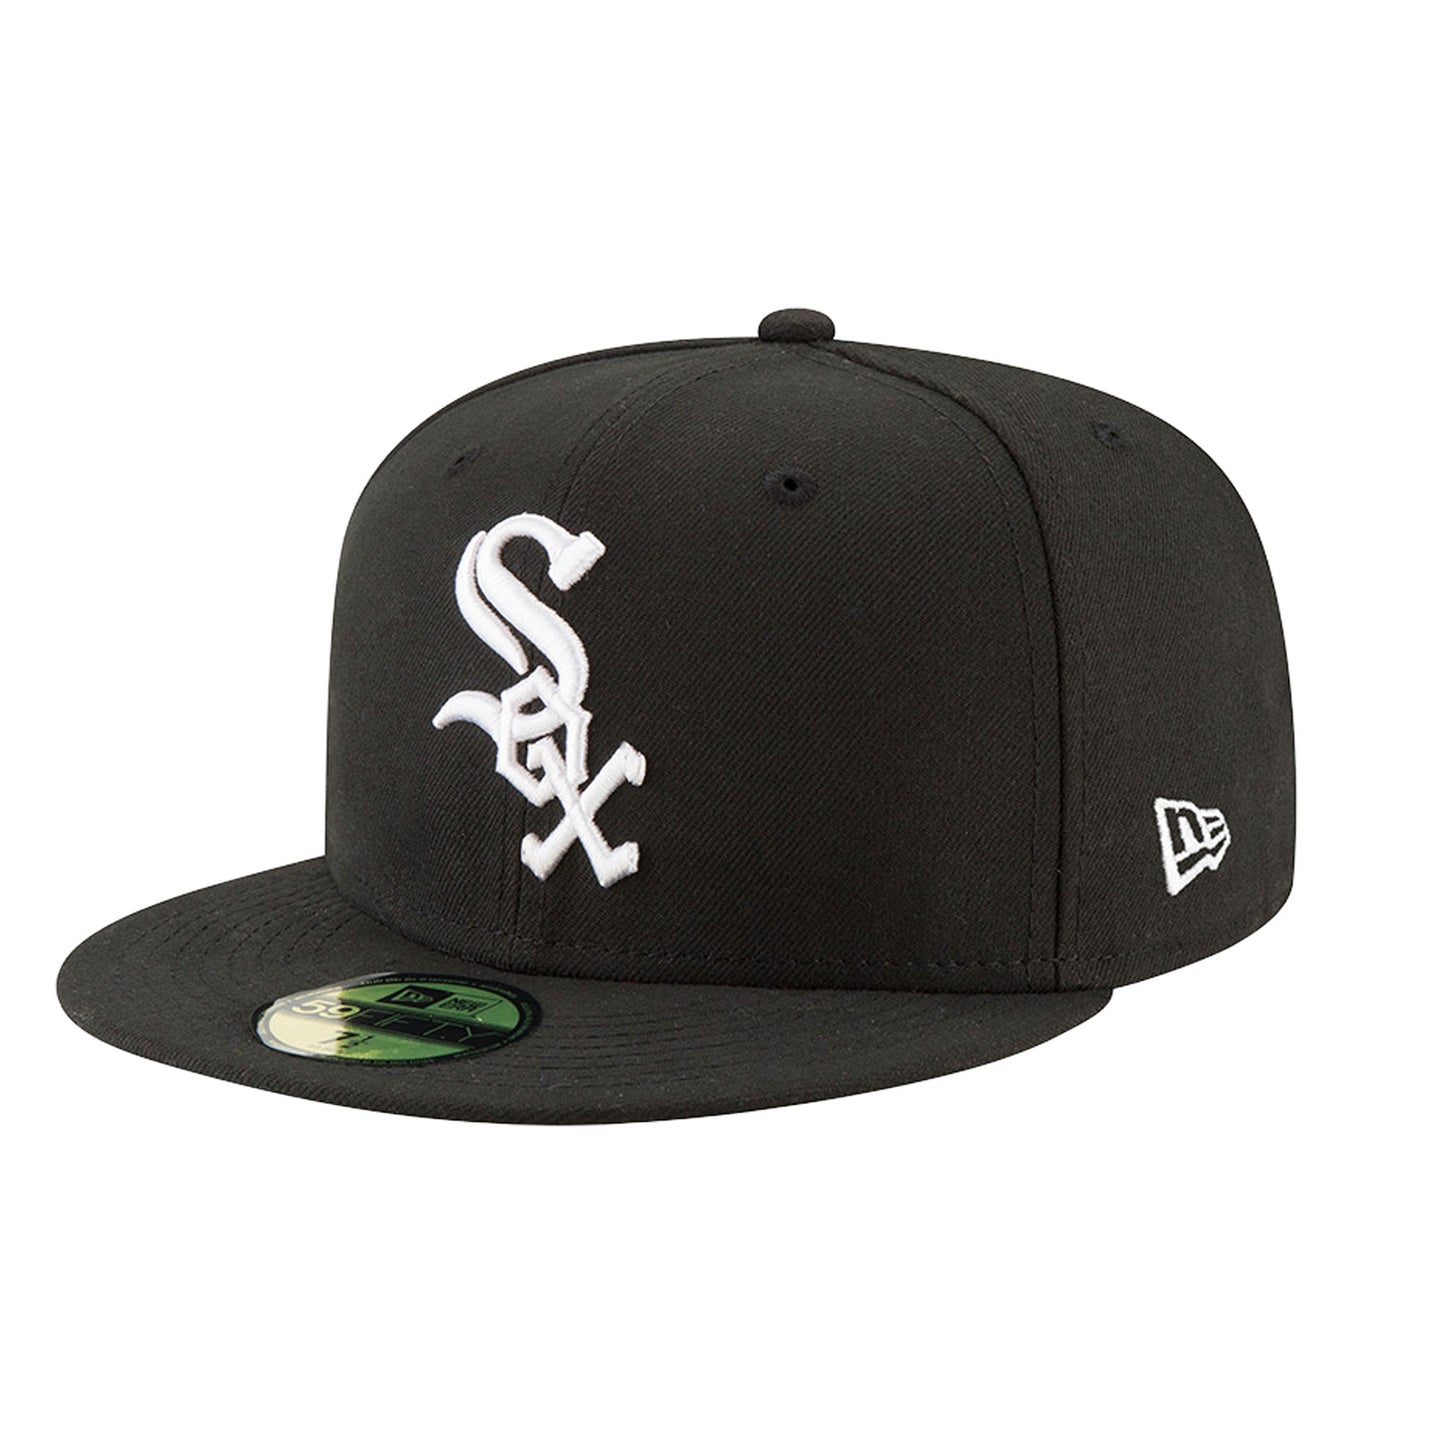 Chicago White Sox Authentic New Era 59FIFTY Cap